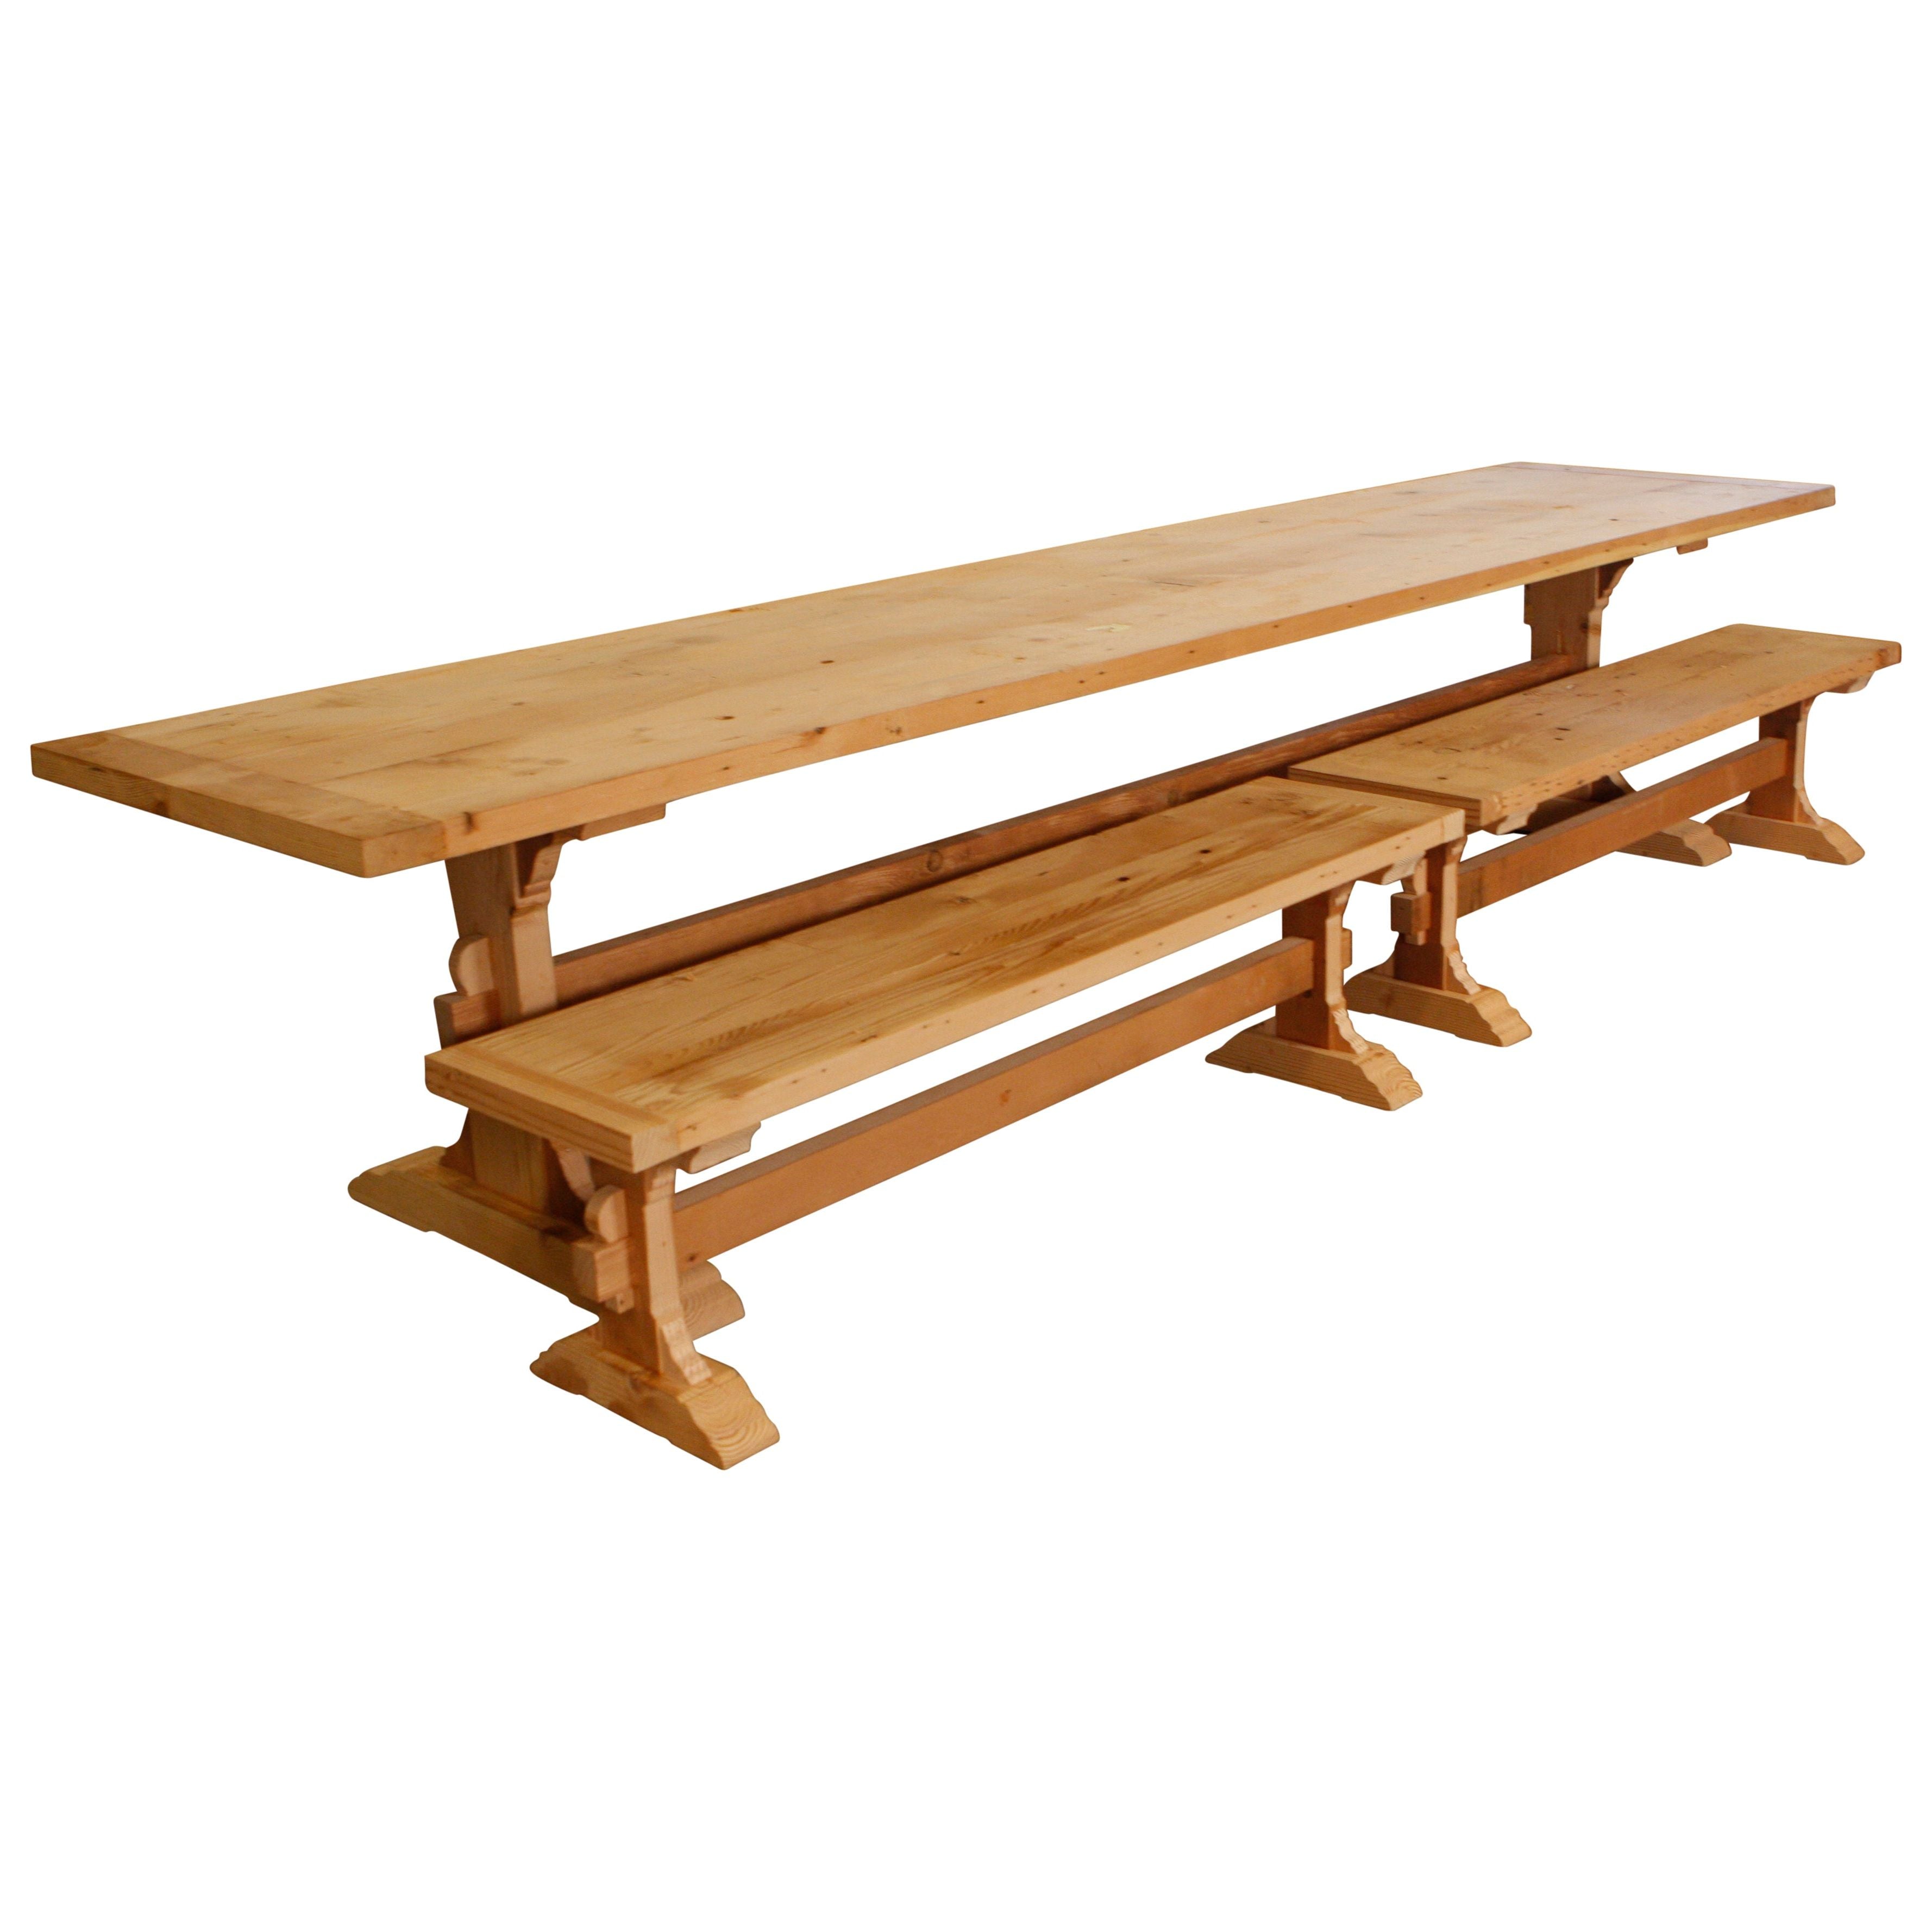 Large Reclaimed Wood Trestle Table With Benches – Mortise & Tenon